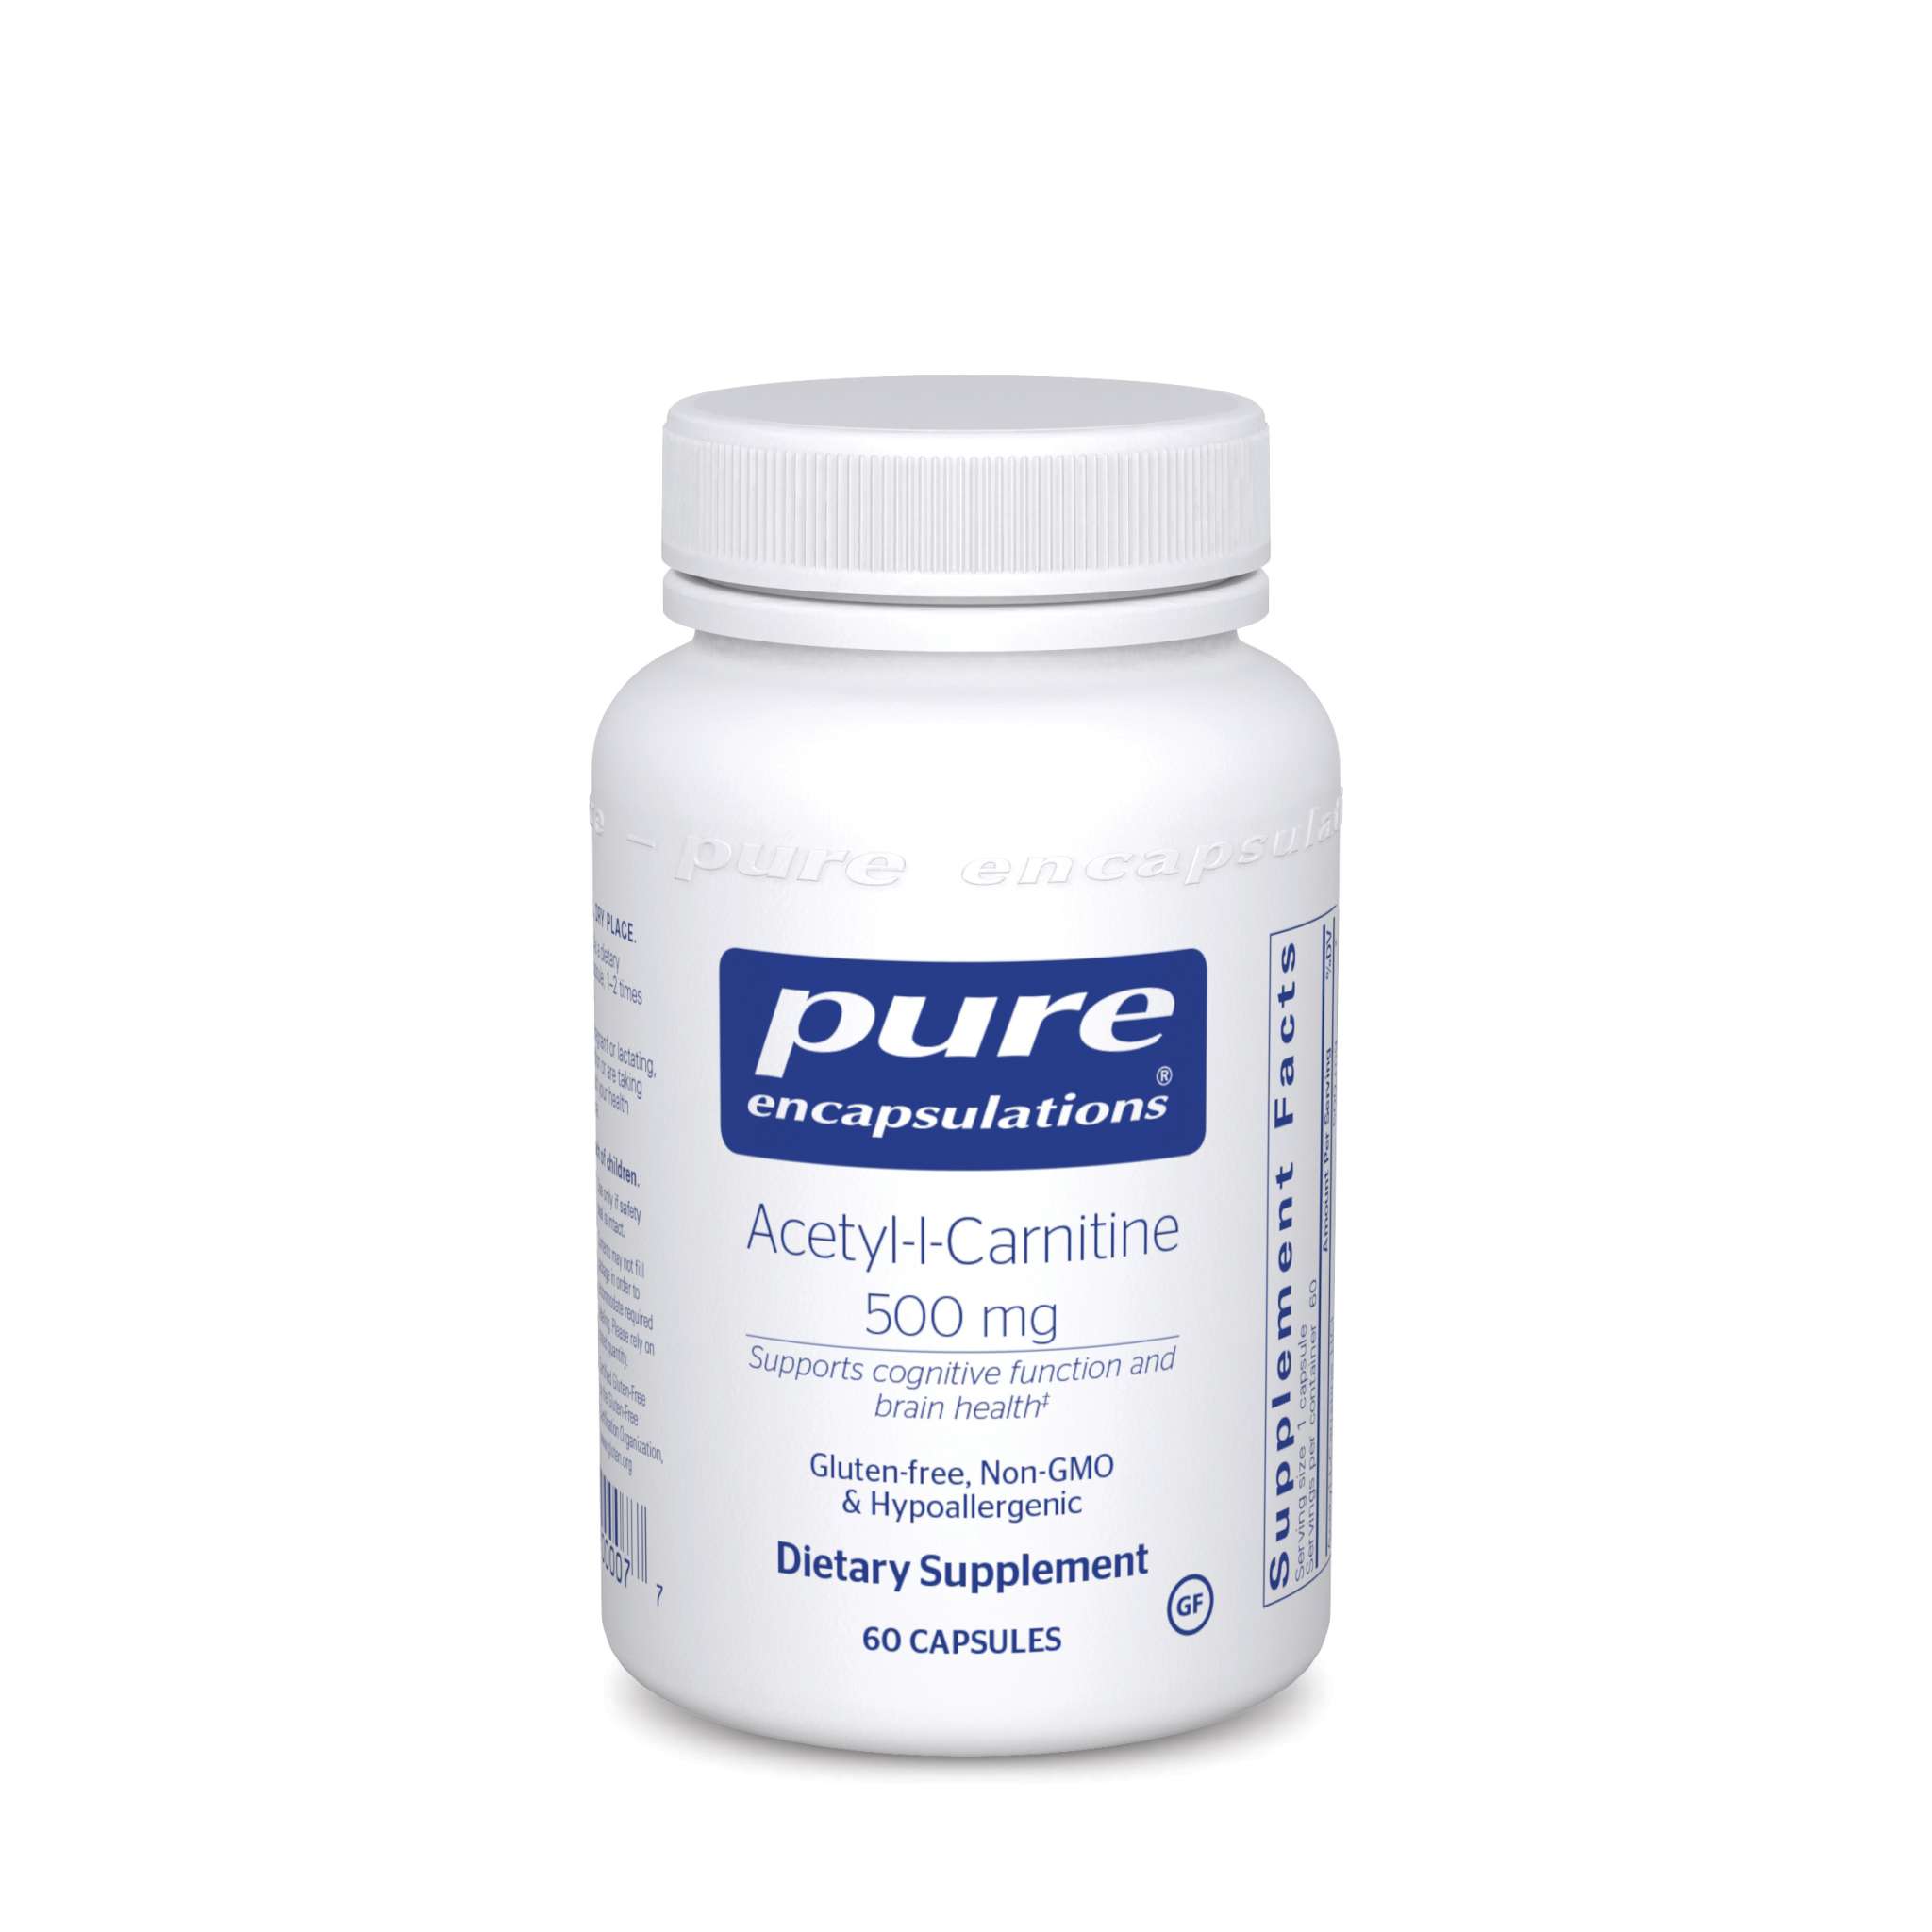 Pure Encapsulations - Acetyl L Carnitine 500 mg